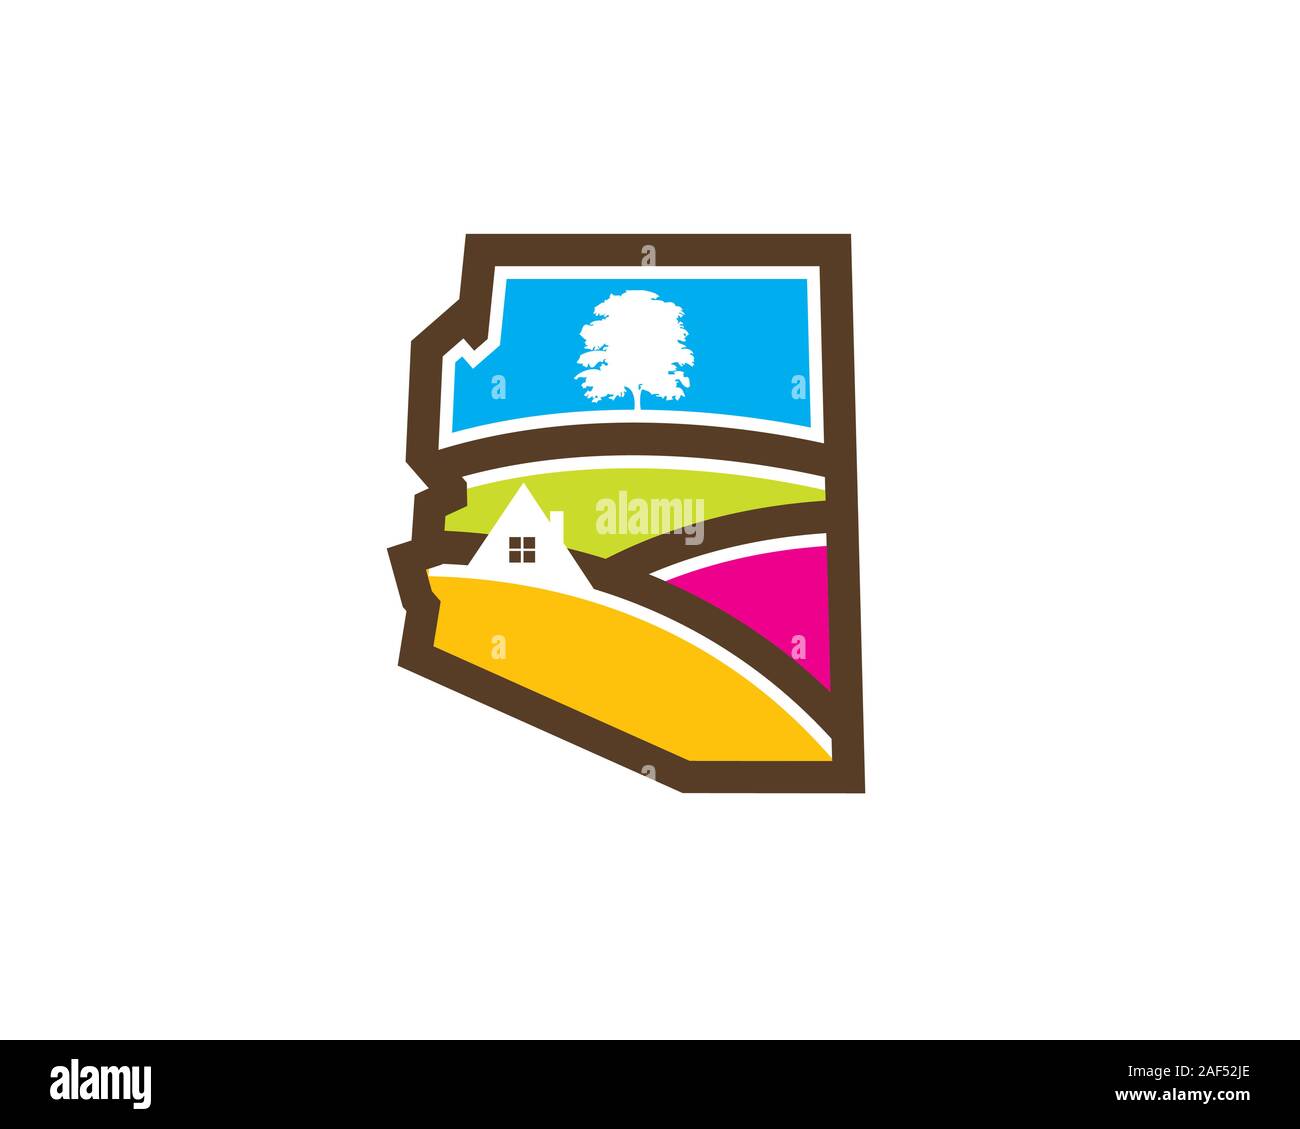 arizona map with valley hill tree house landscape real estate logo Stock Vector